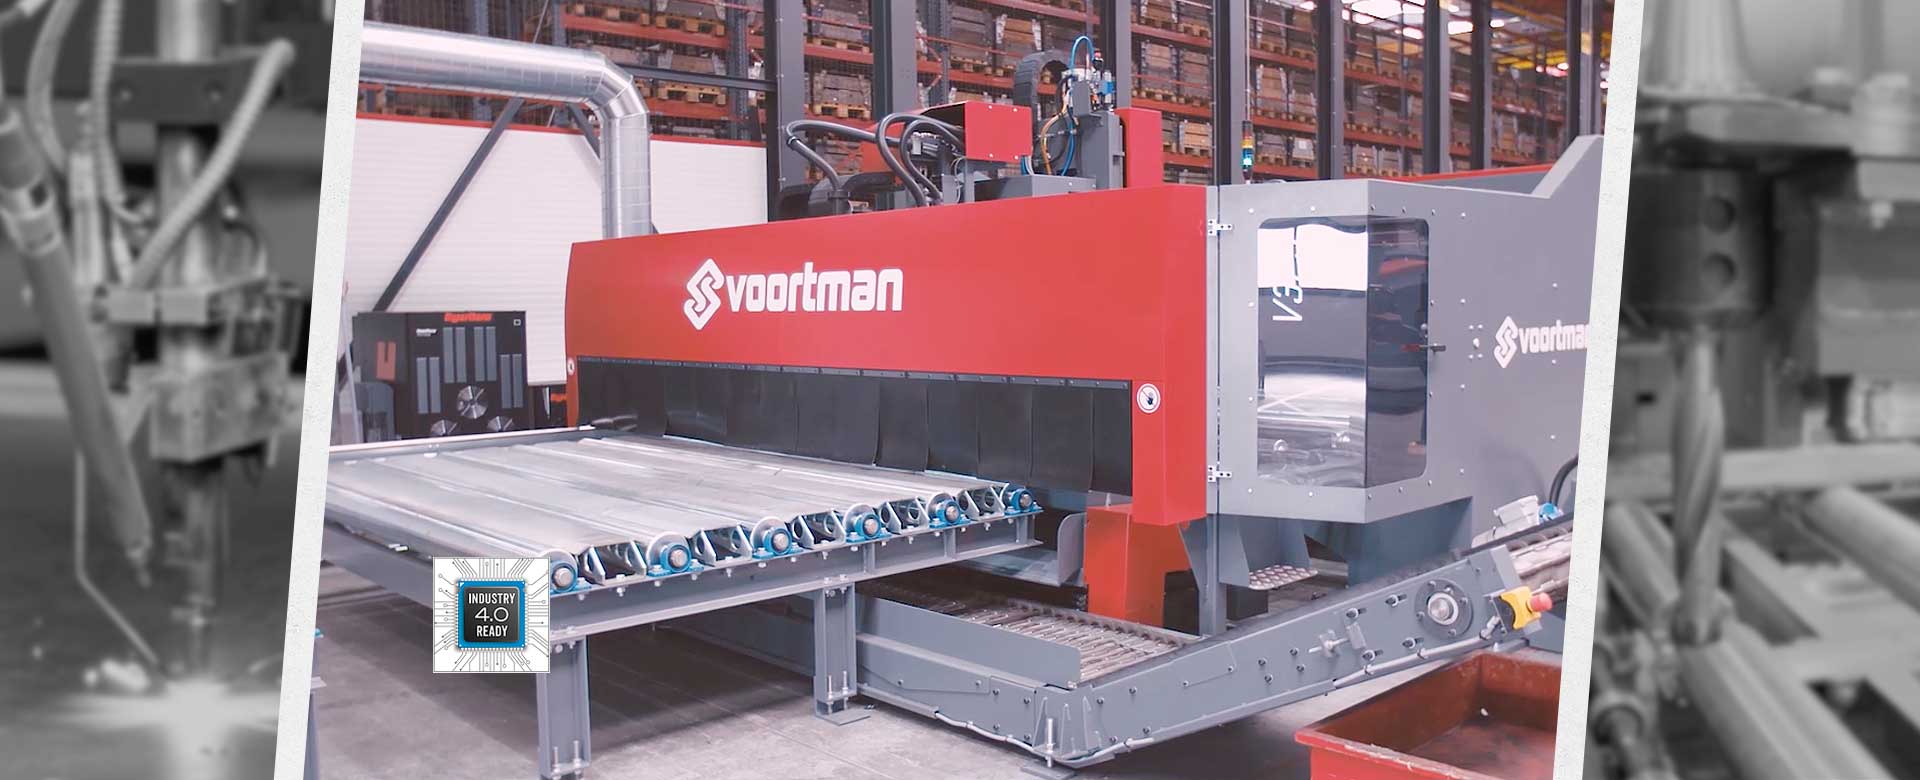 Gulf States Saw & Machine Co. offers the Voortman V325 Heavy plate drilling and milling machine.